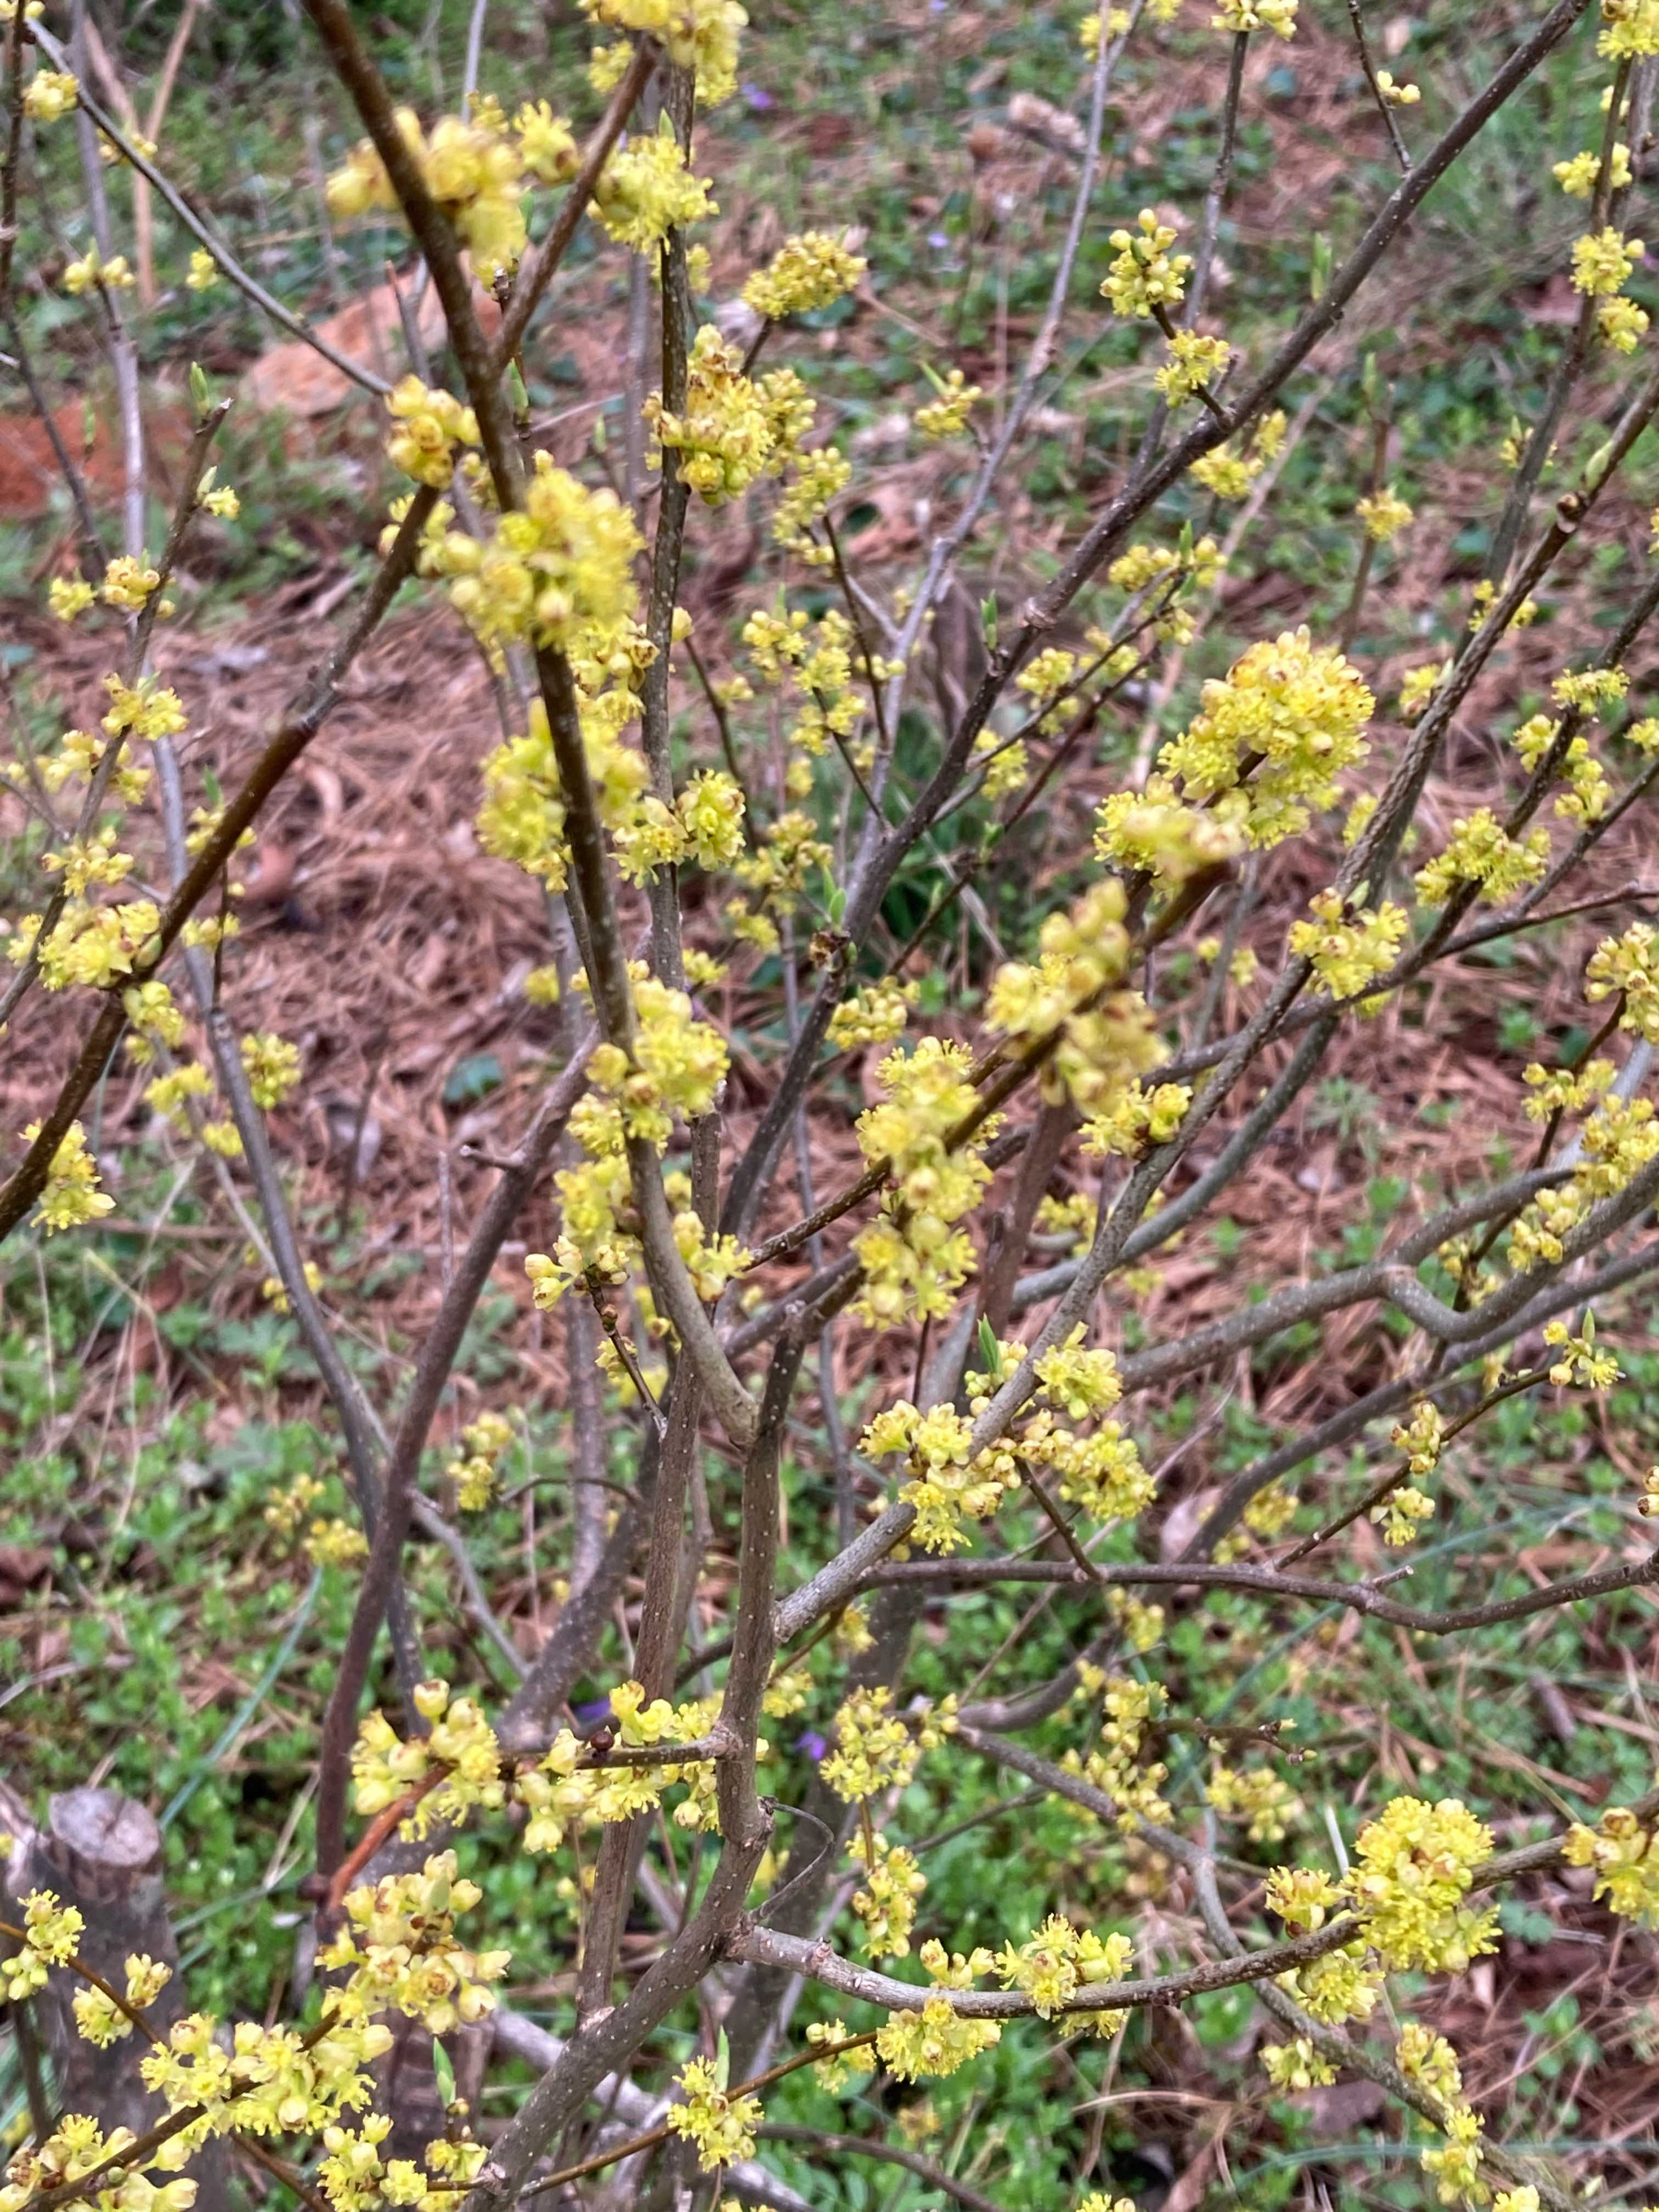 The Scientific Name is Lindera benzoin. You will likely hear them called Northern Spicebush. This picture shows the The flowers bloom in the Spring before the leaves emerge. of Lindera benzoin